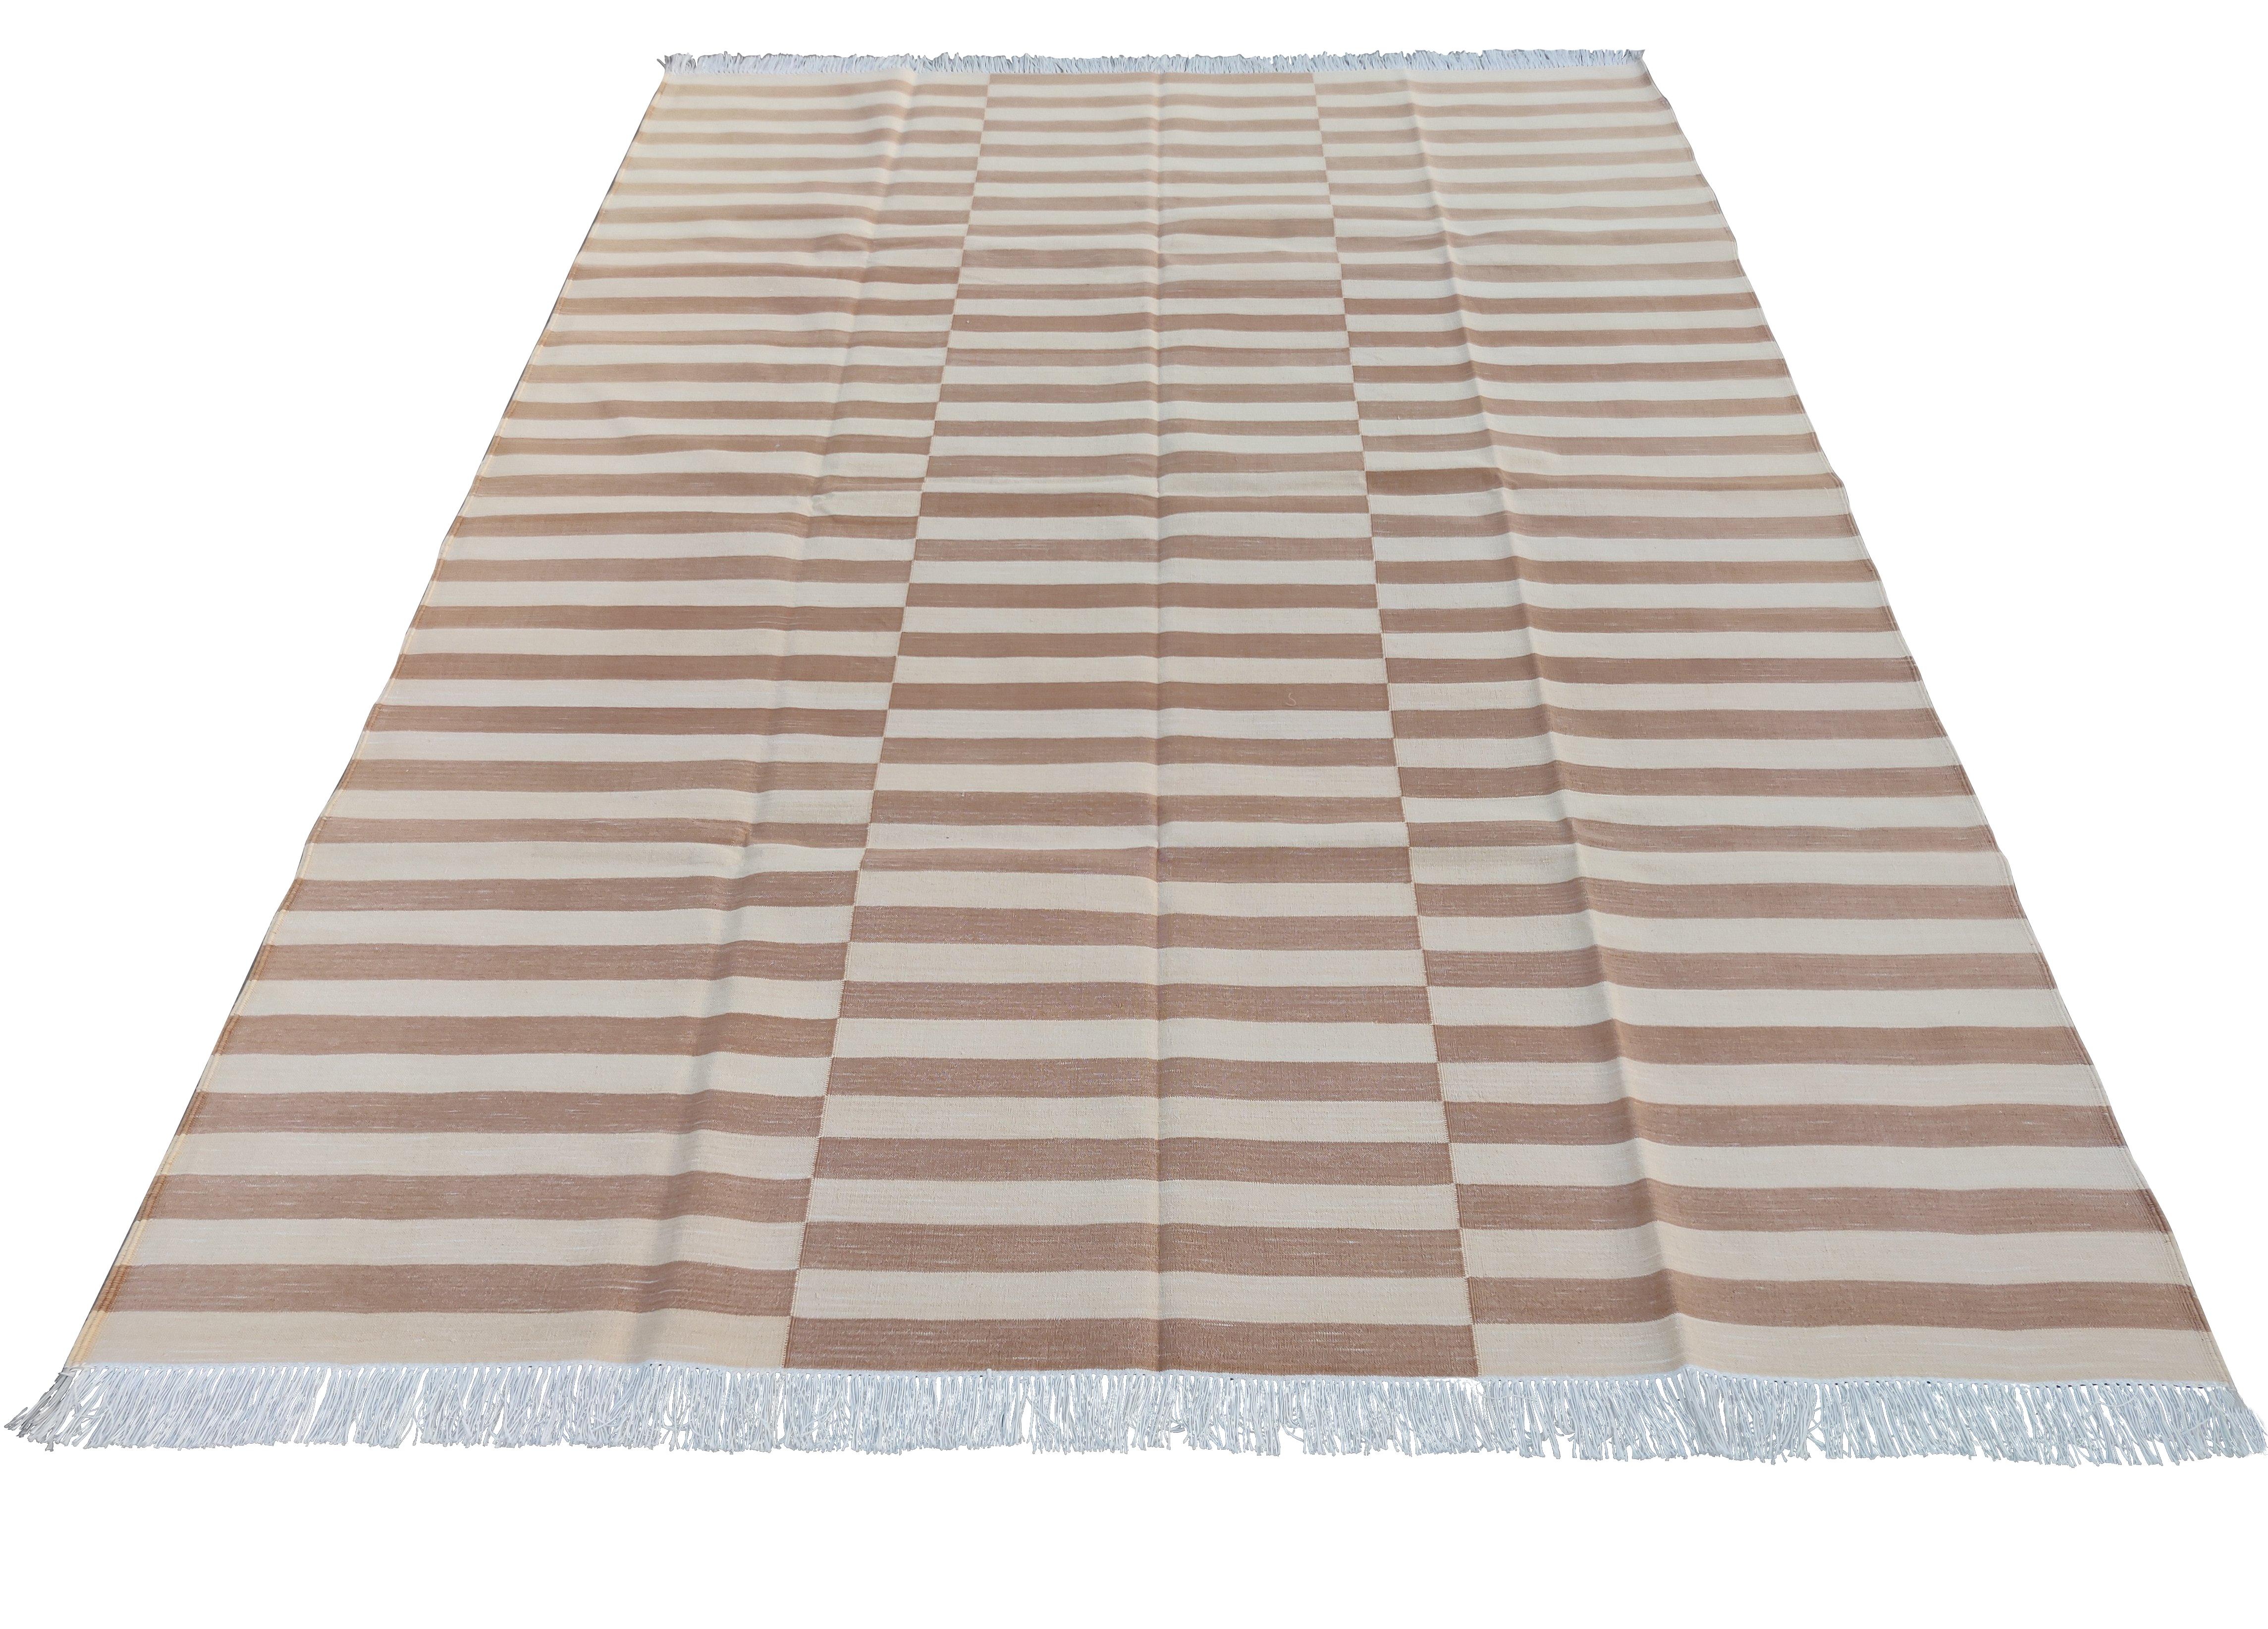 Hand-Woven Handmade Cotton Area Flat Weave Rug, 6x9 Tan And Cream Striped Indian Dhurrie For Sale